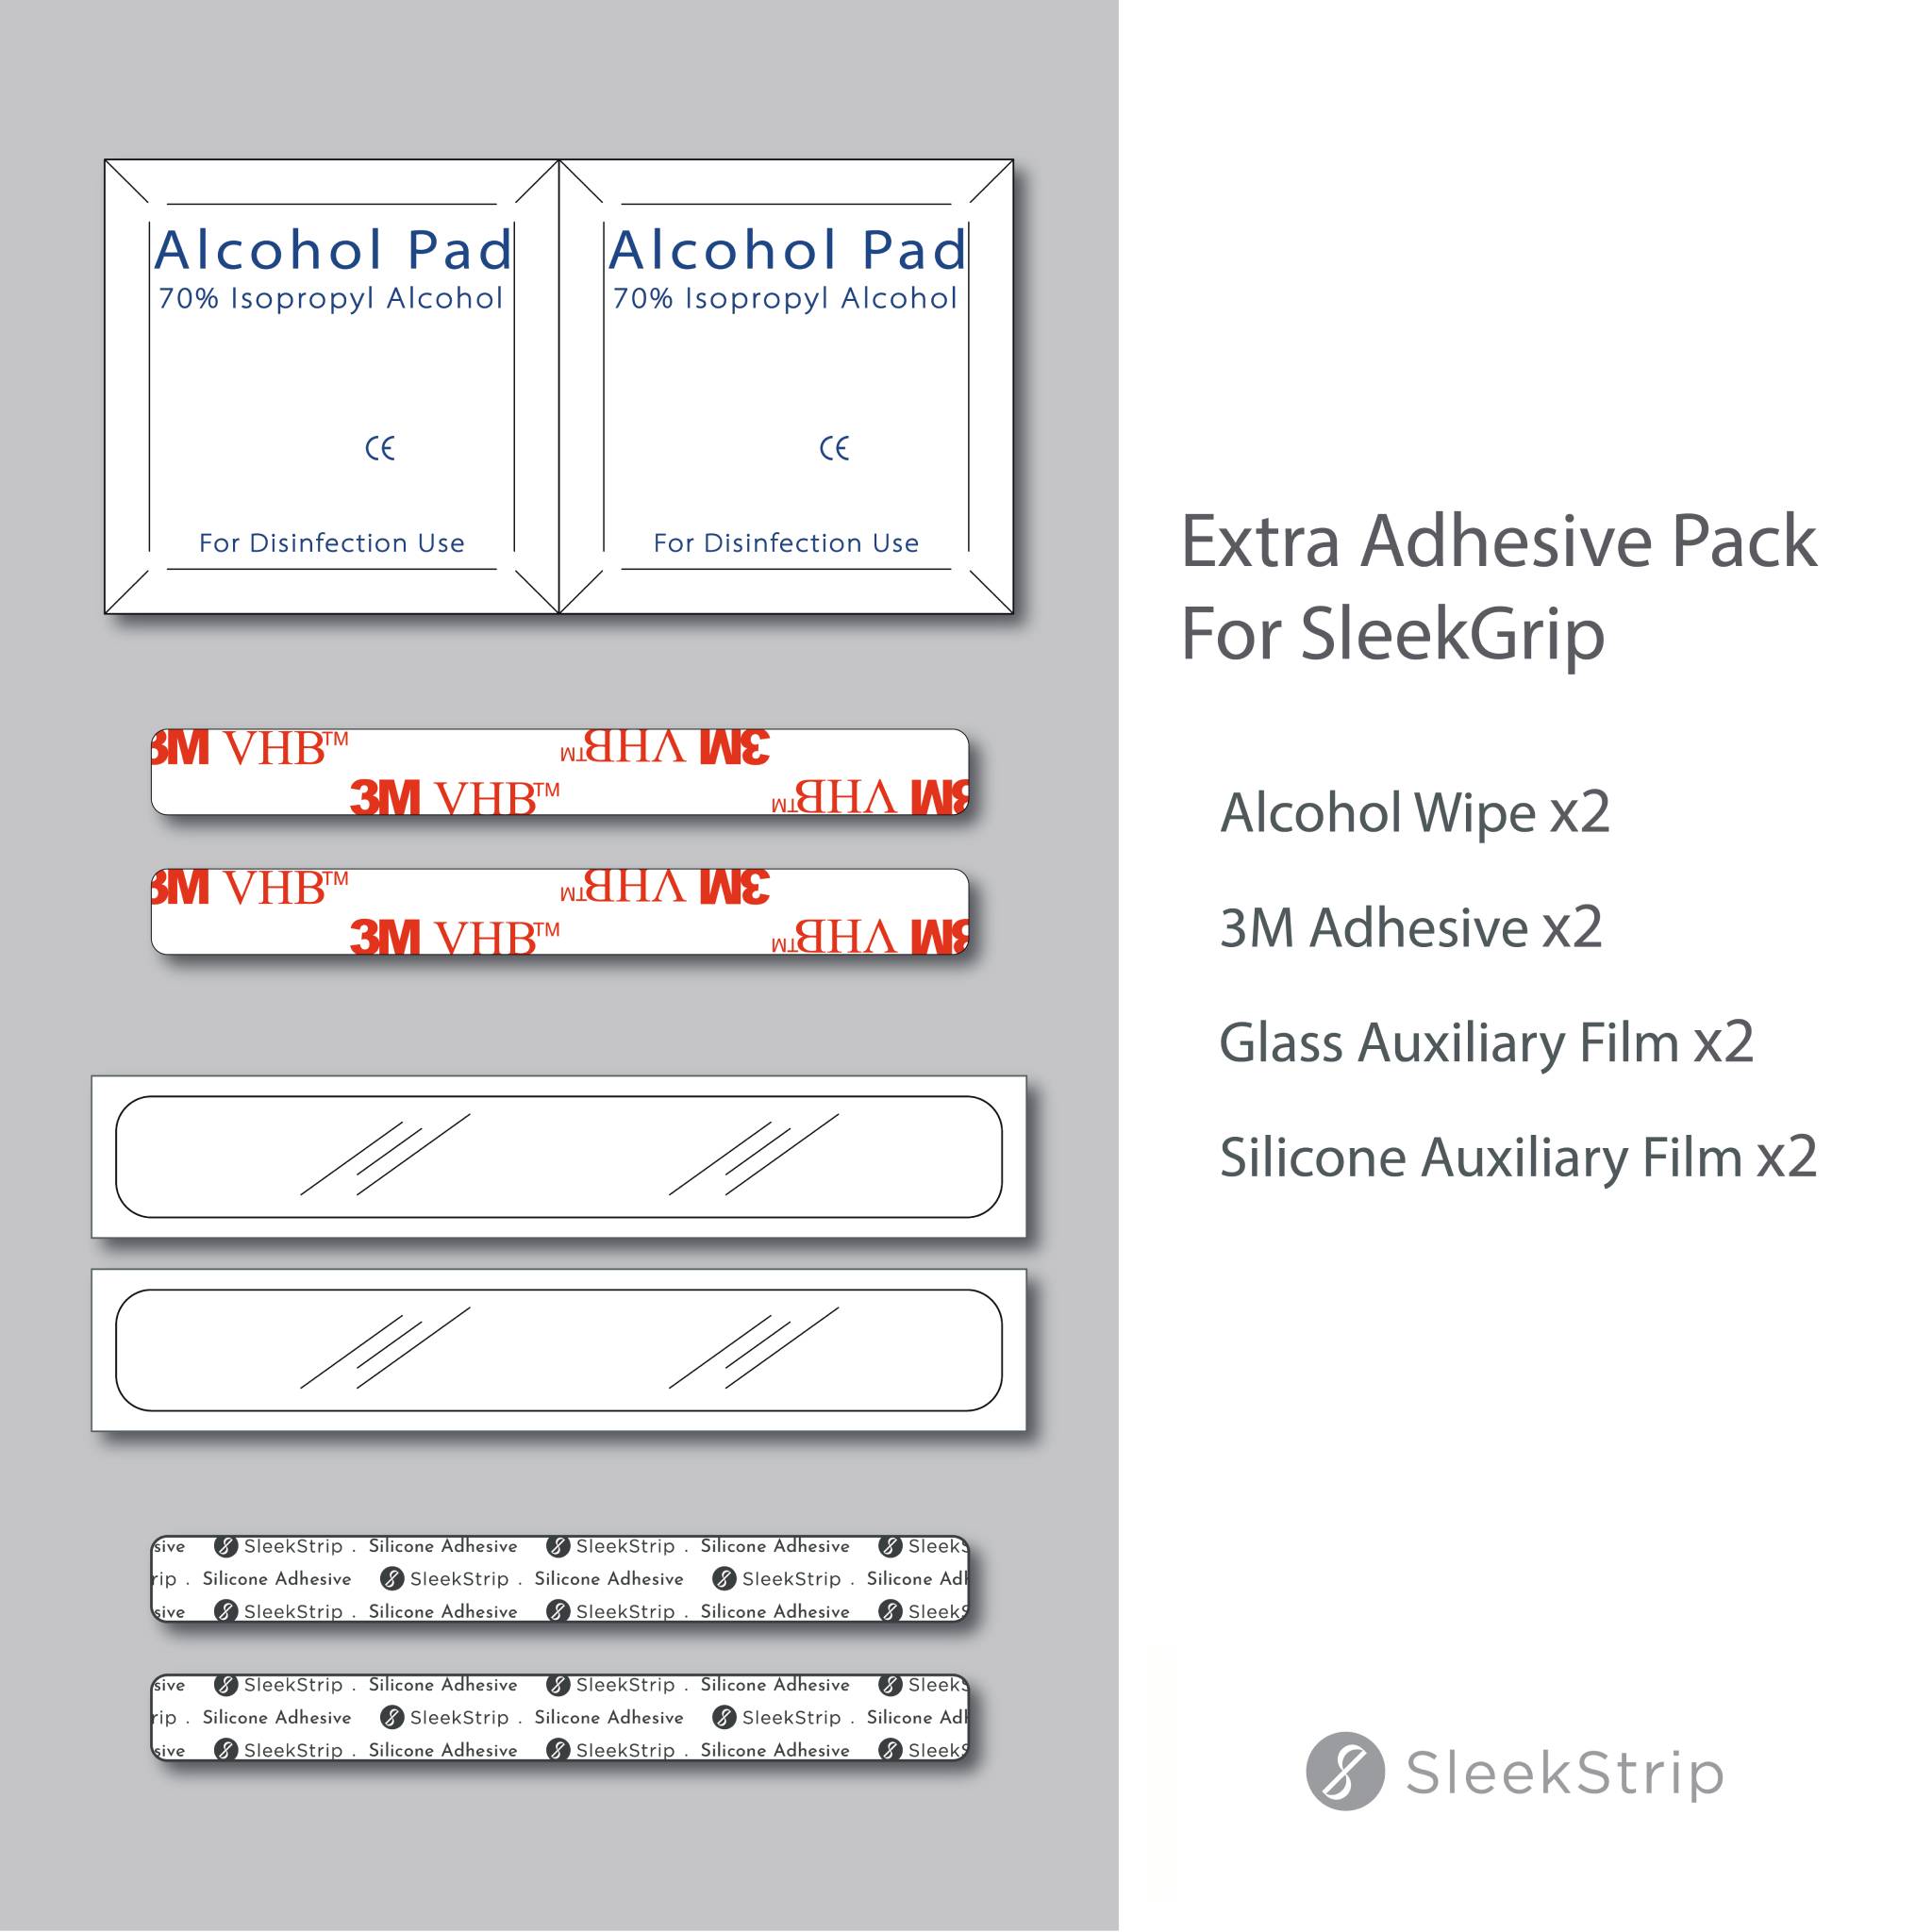 Extra Adhesive Pack For SleekGrip (New)